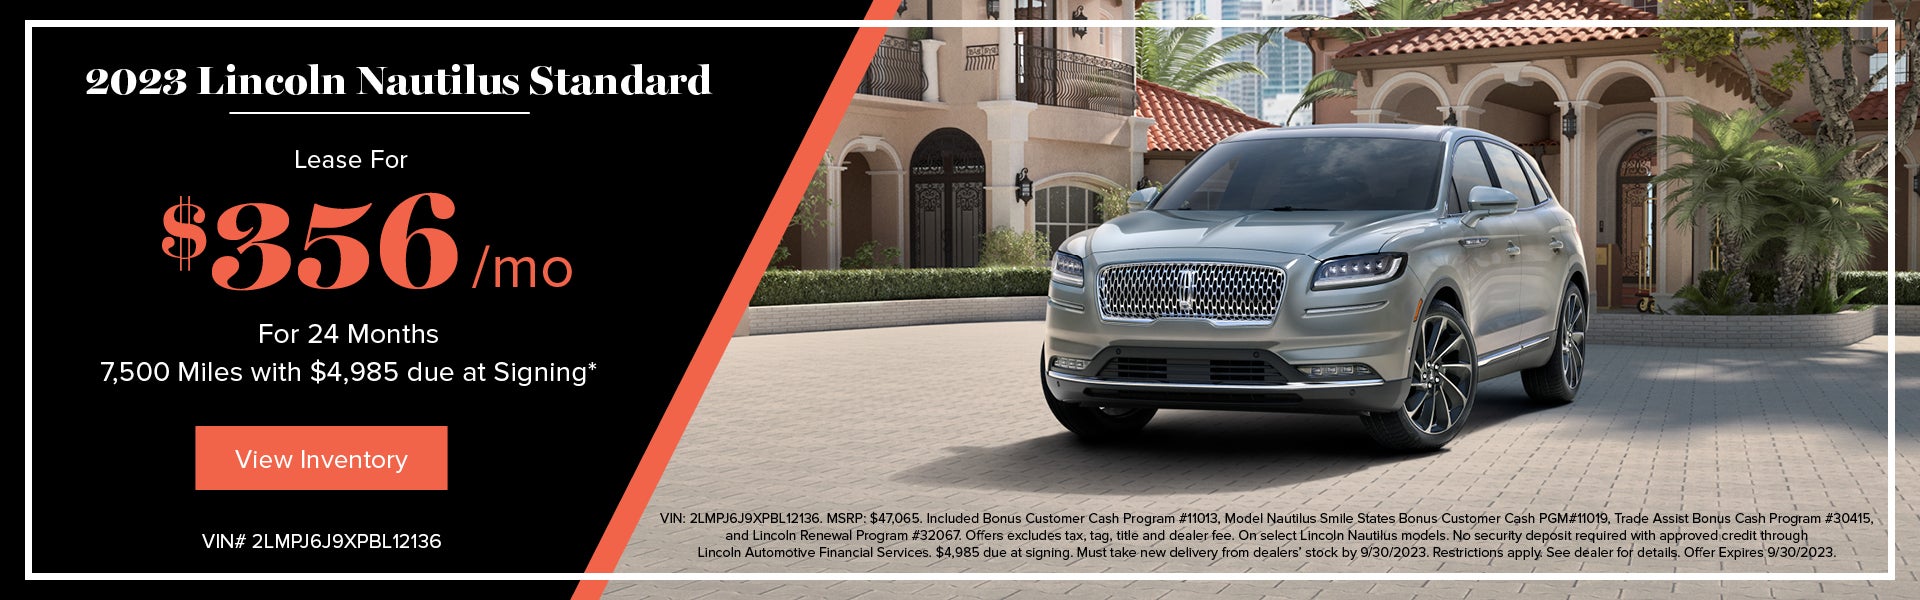 2023 Lincoln Nautilus Standard $356/mo for 24 months 7,500 m